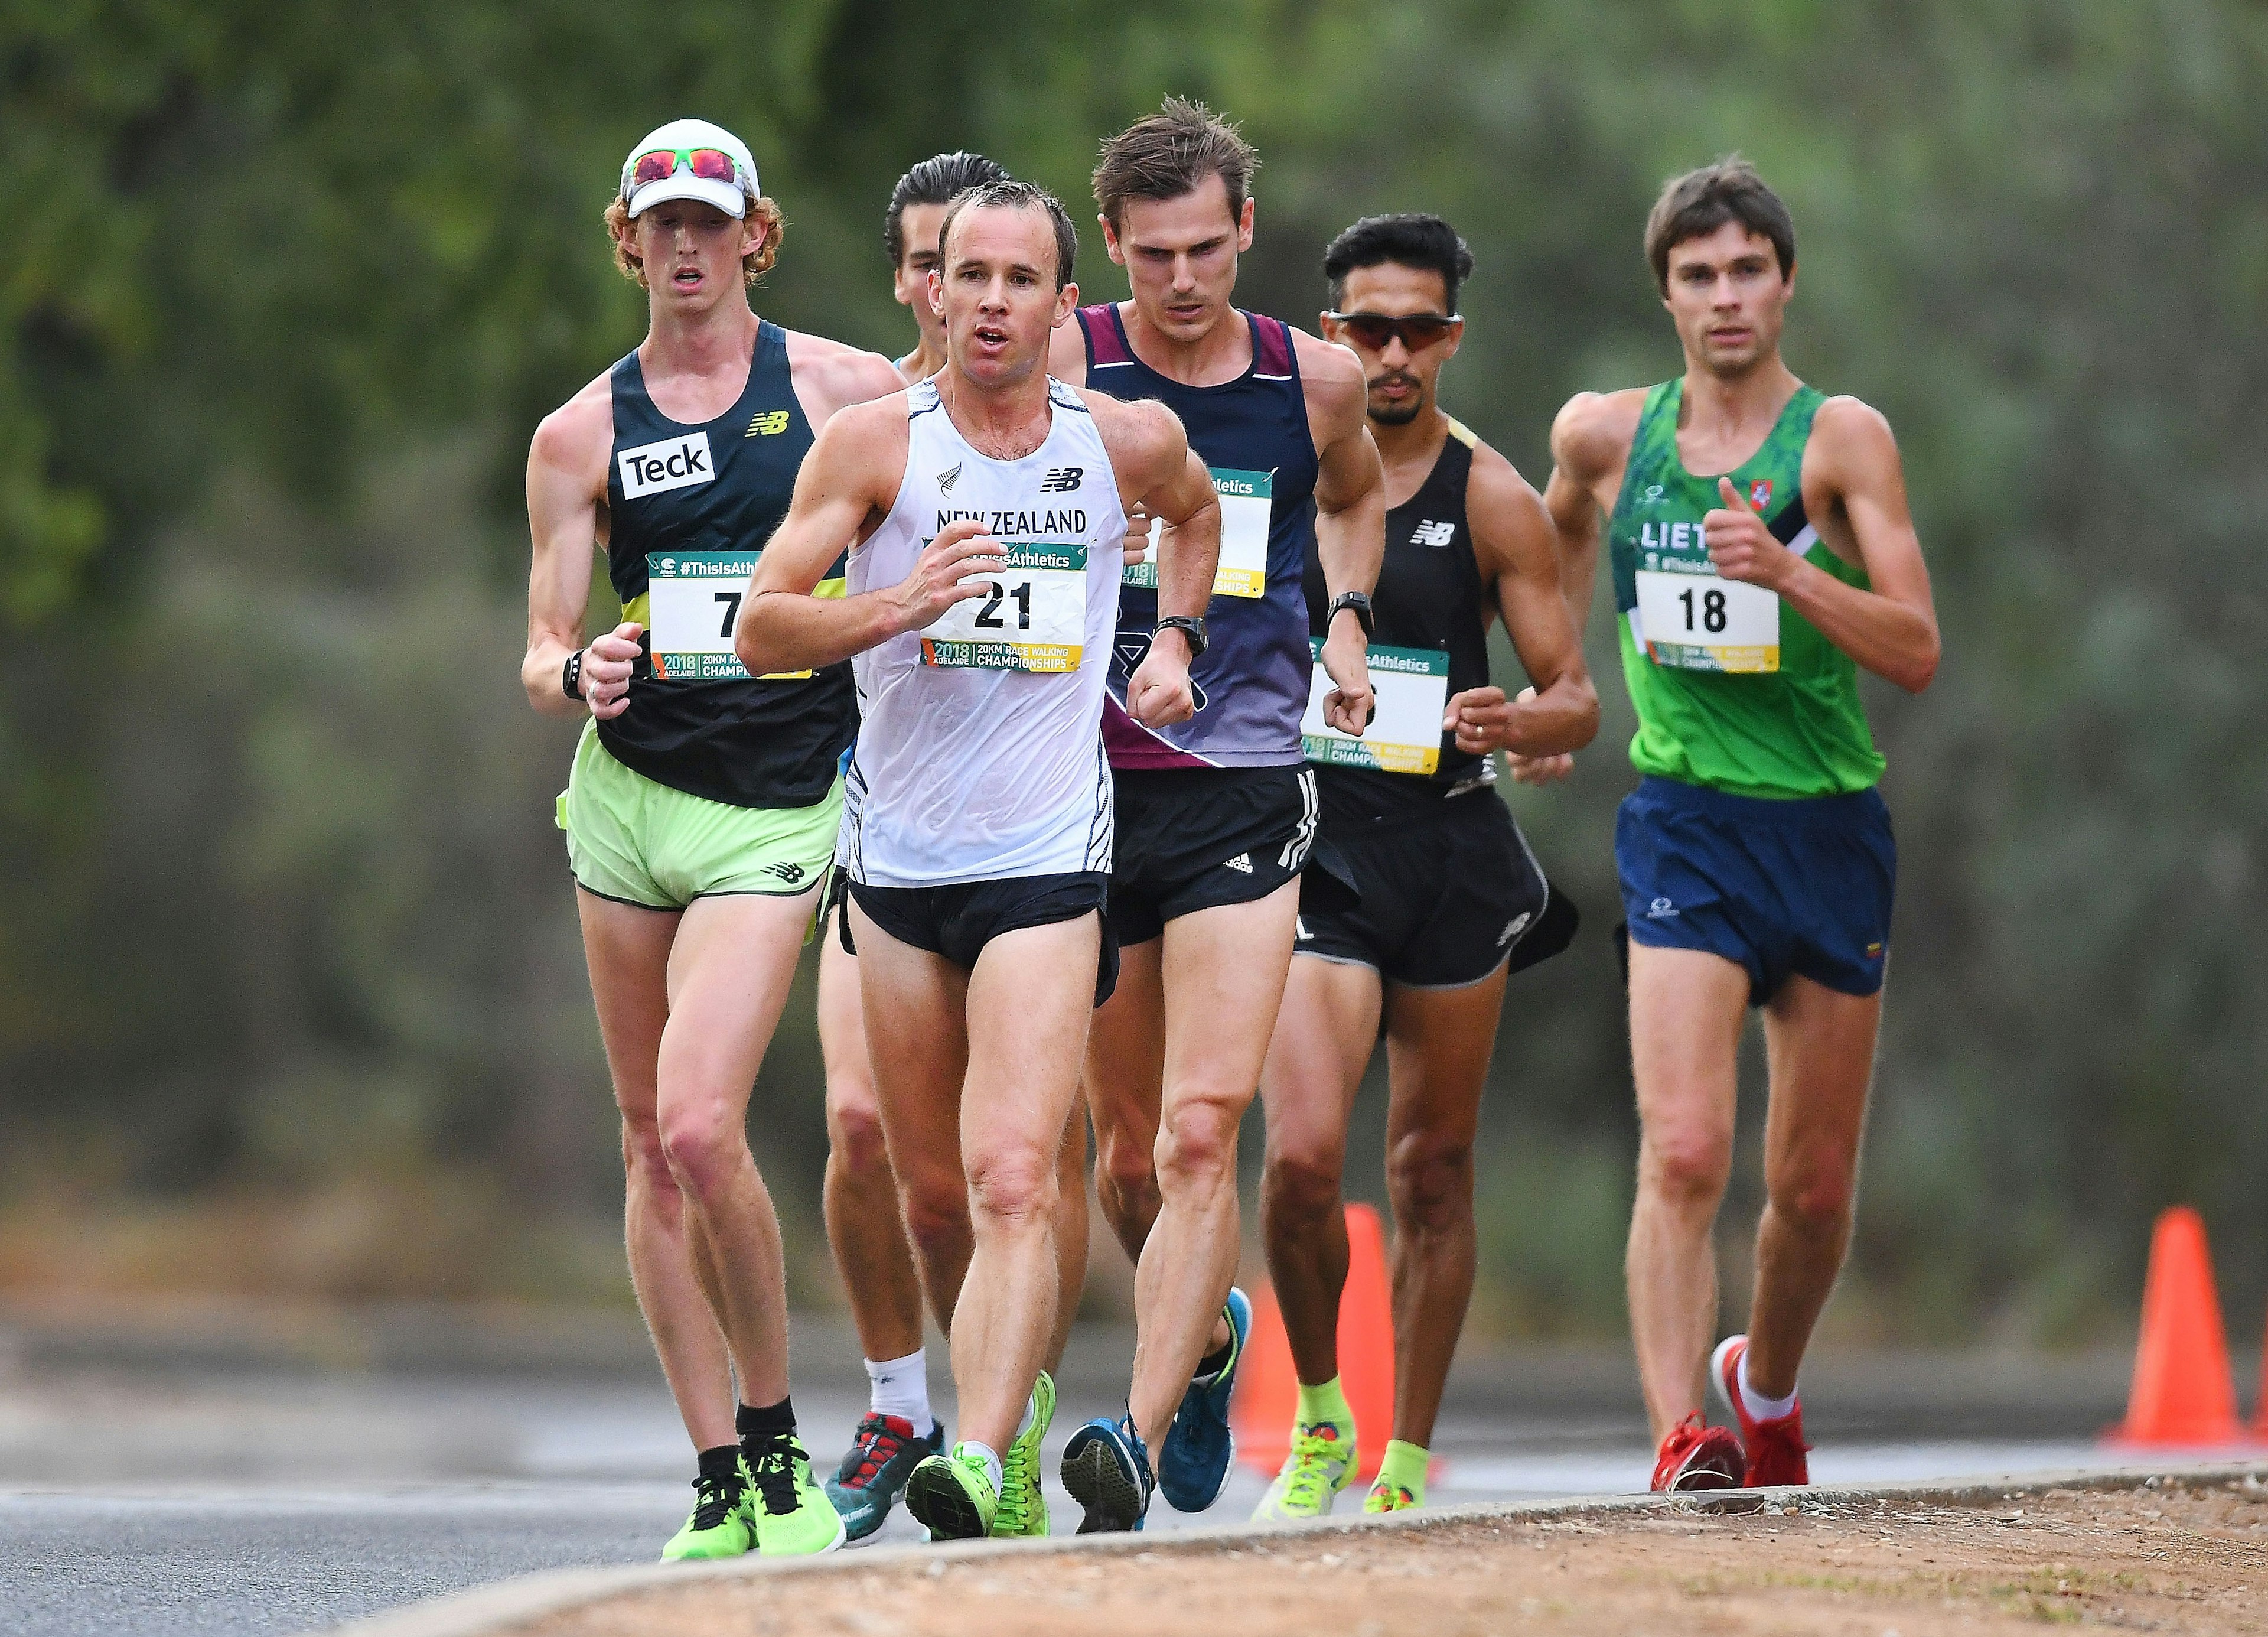 Racewalking Rew relieved to hit Tokyo 2020 qualification standard early